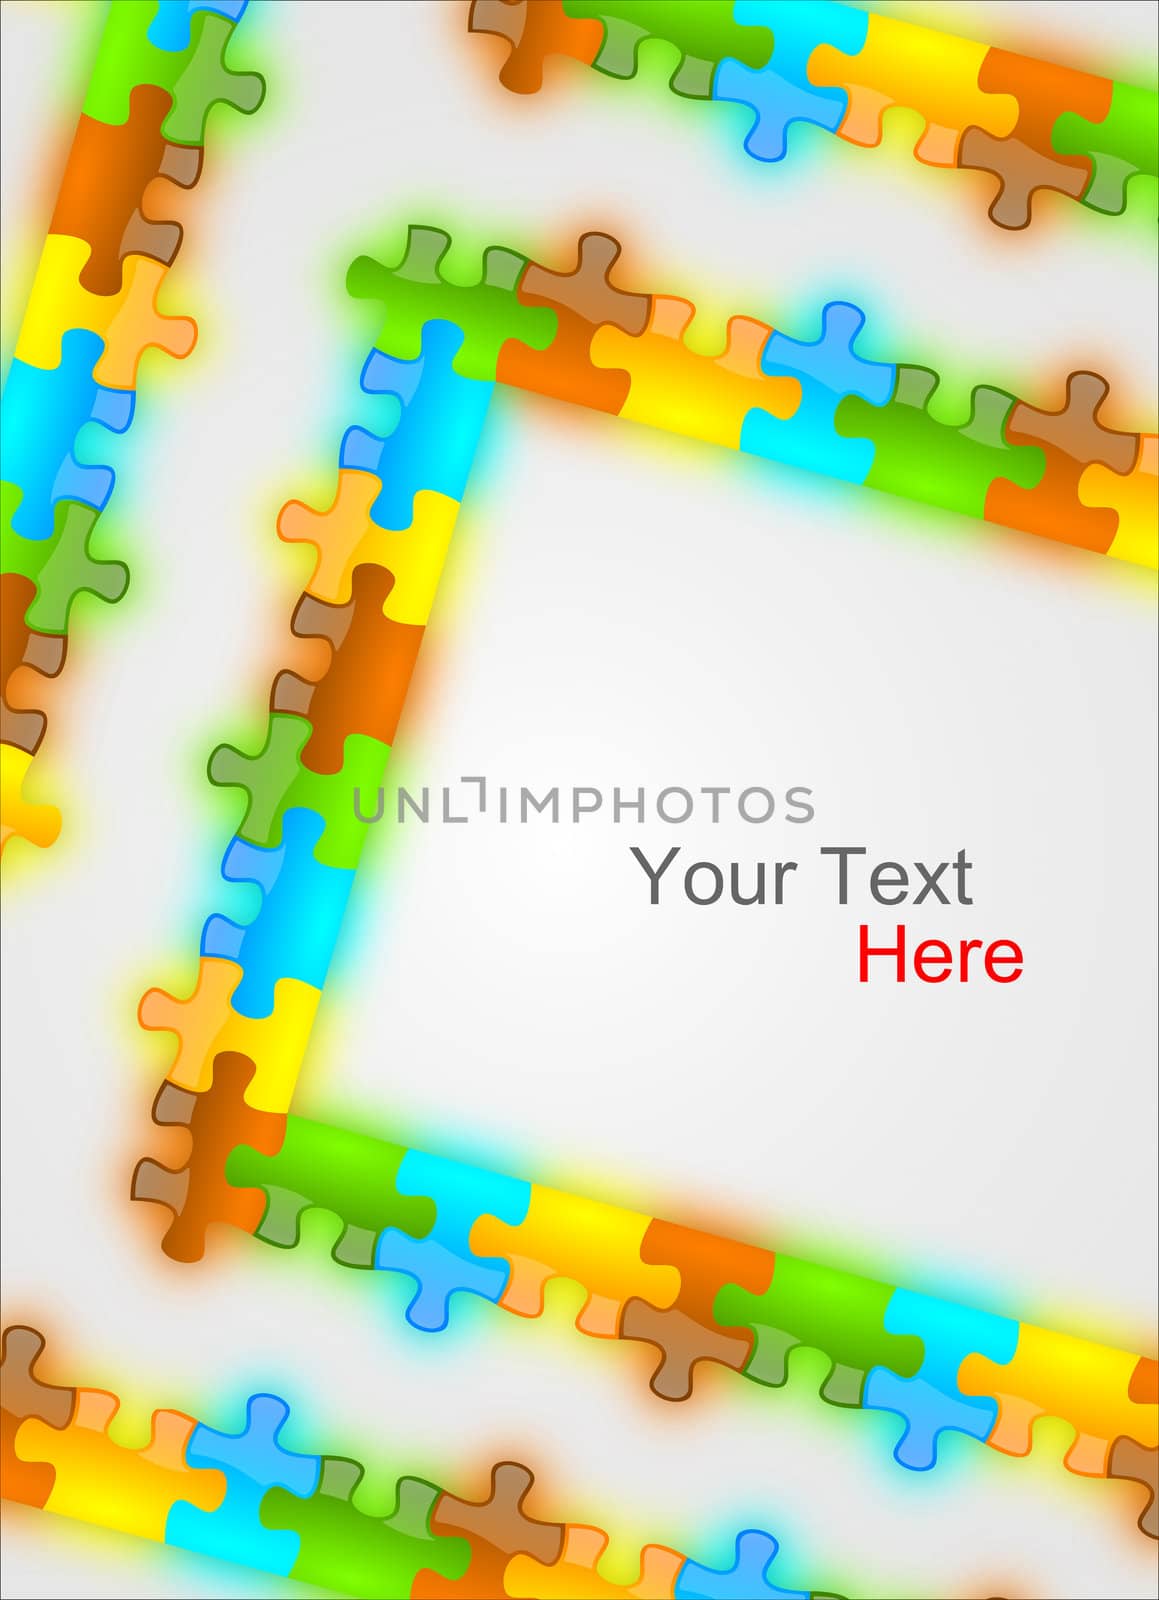 Color and glossy puzzle frame background usefull for cover pages, brochure, presentation and advertising messages